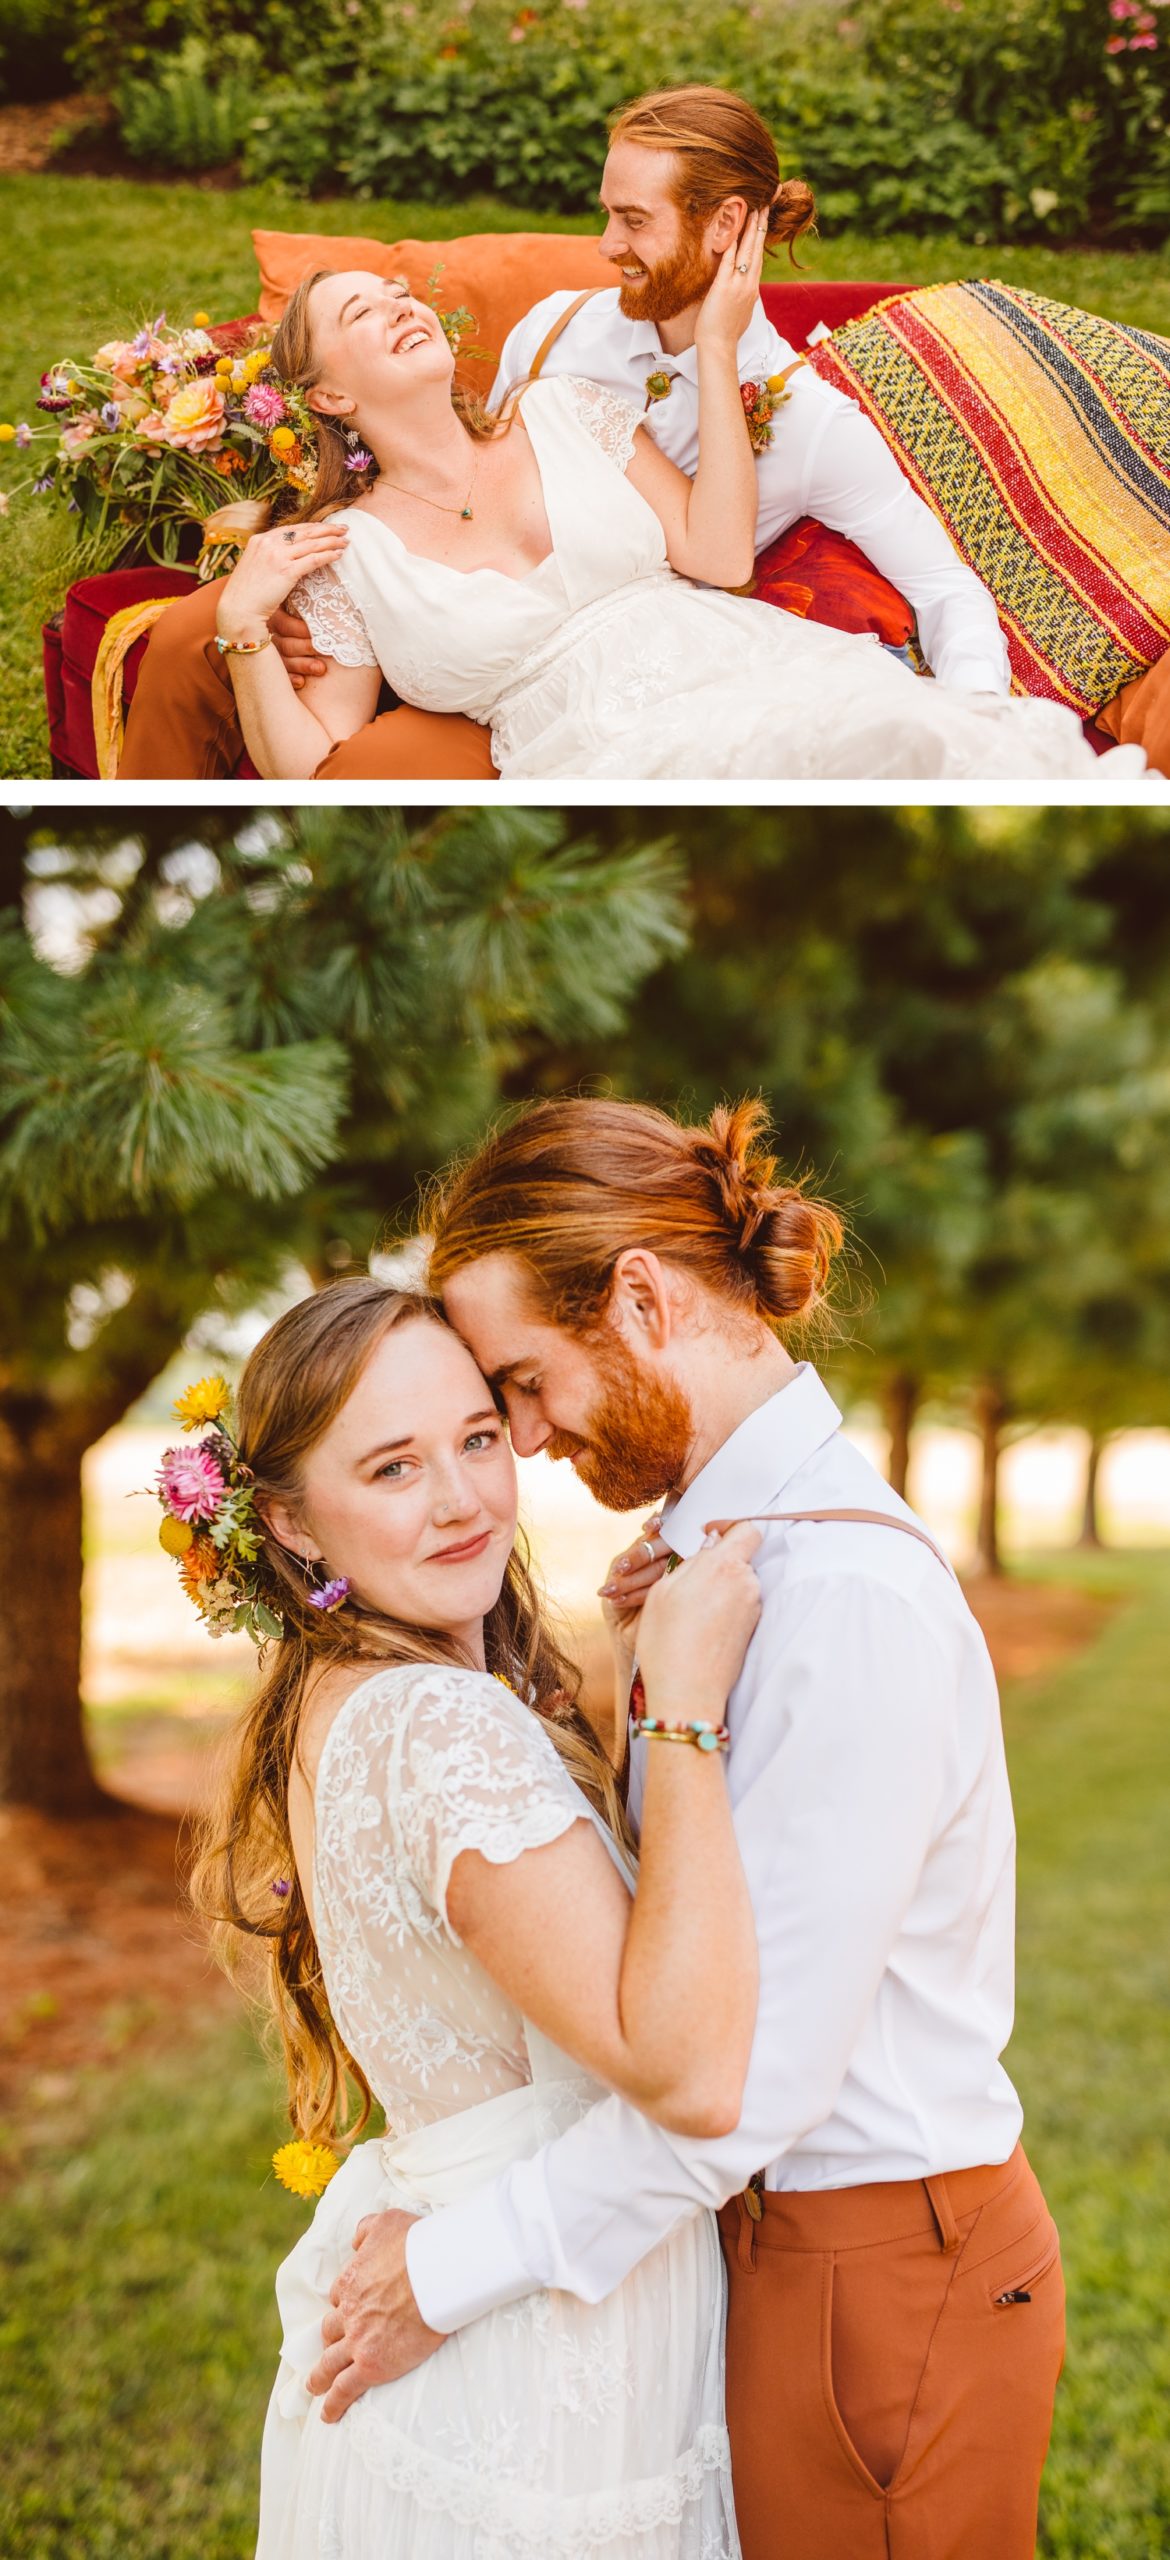 Bride and groom lounging on couch | boho bride looking at camera while groom looks at her | Brooke Michelle Photography